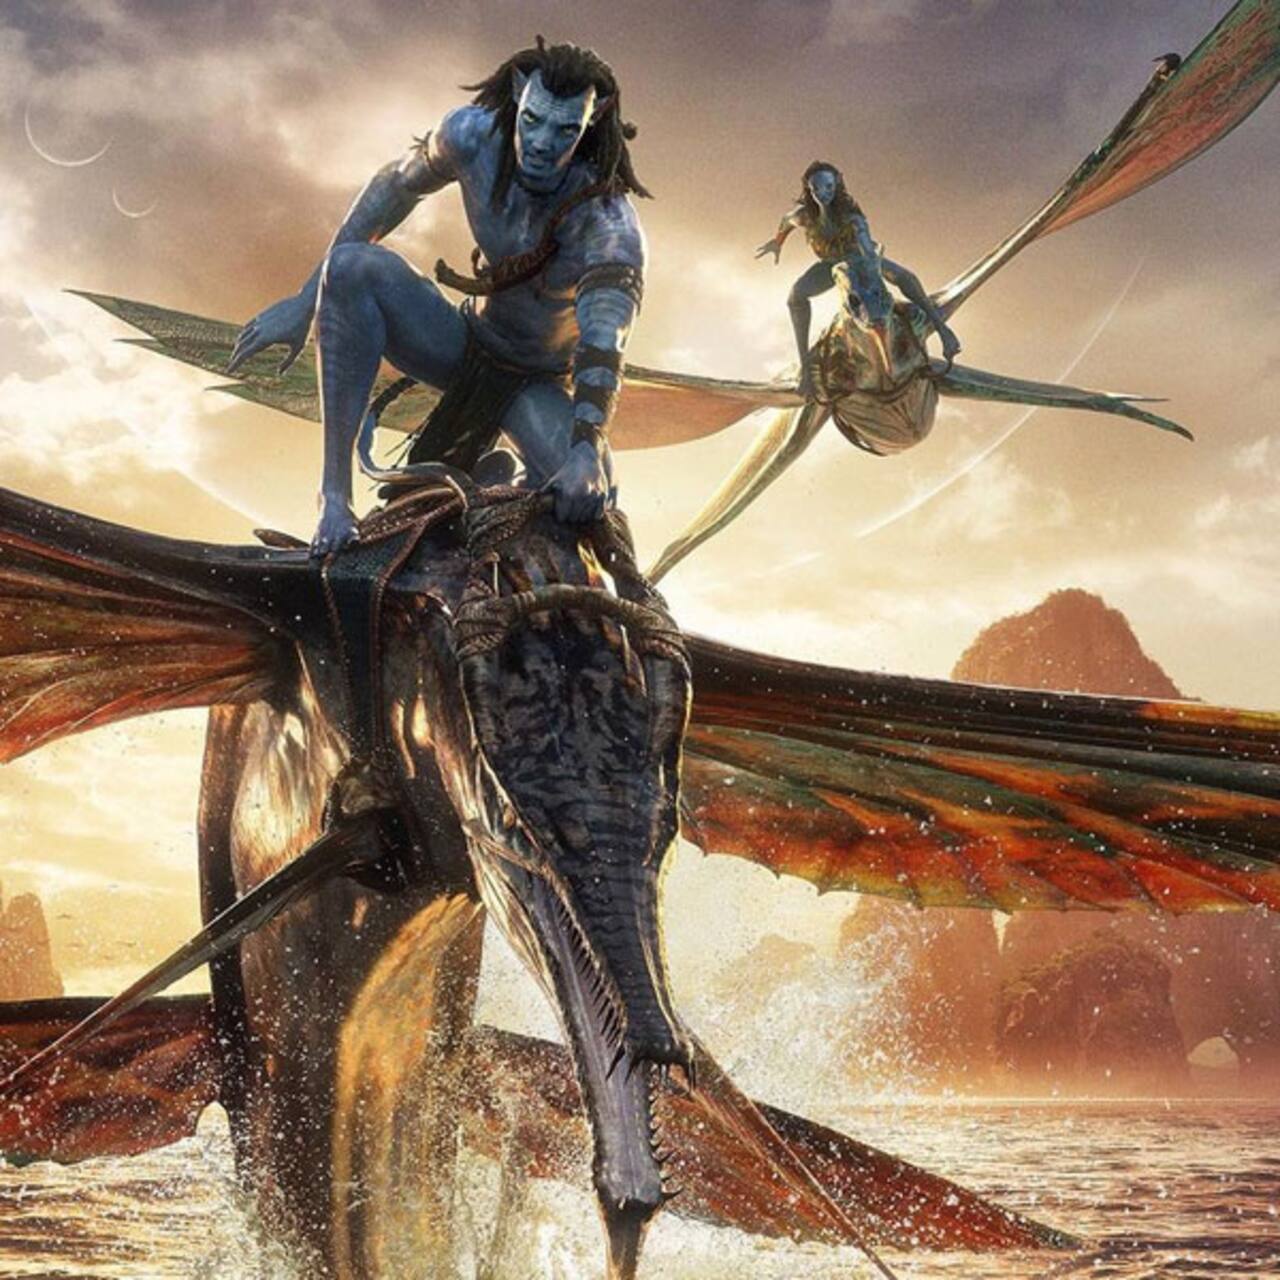 Avatar 2 The Way Of Water: Here is what you need to know